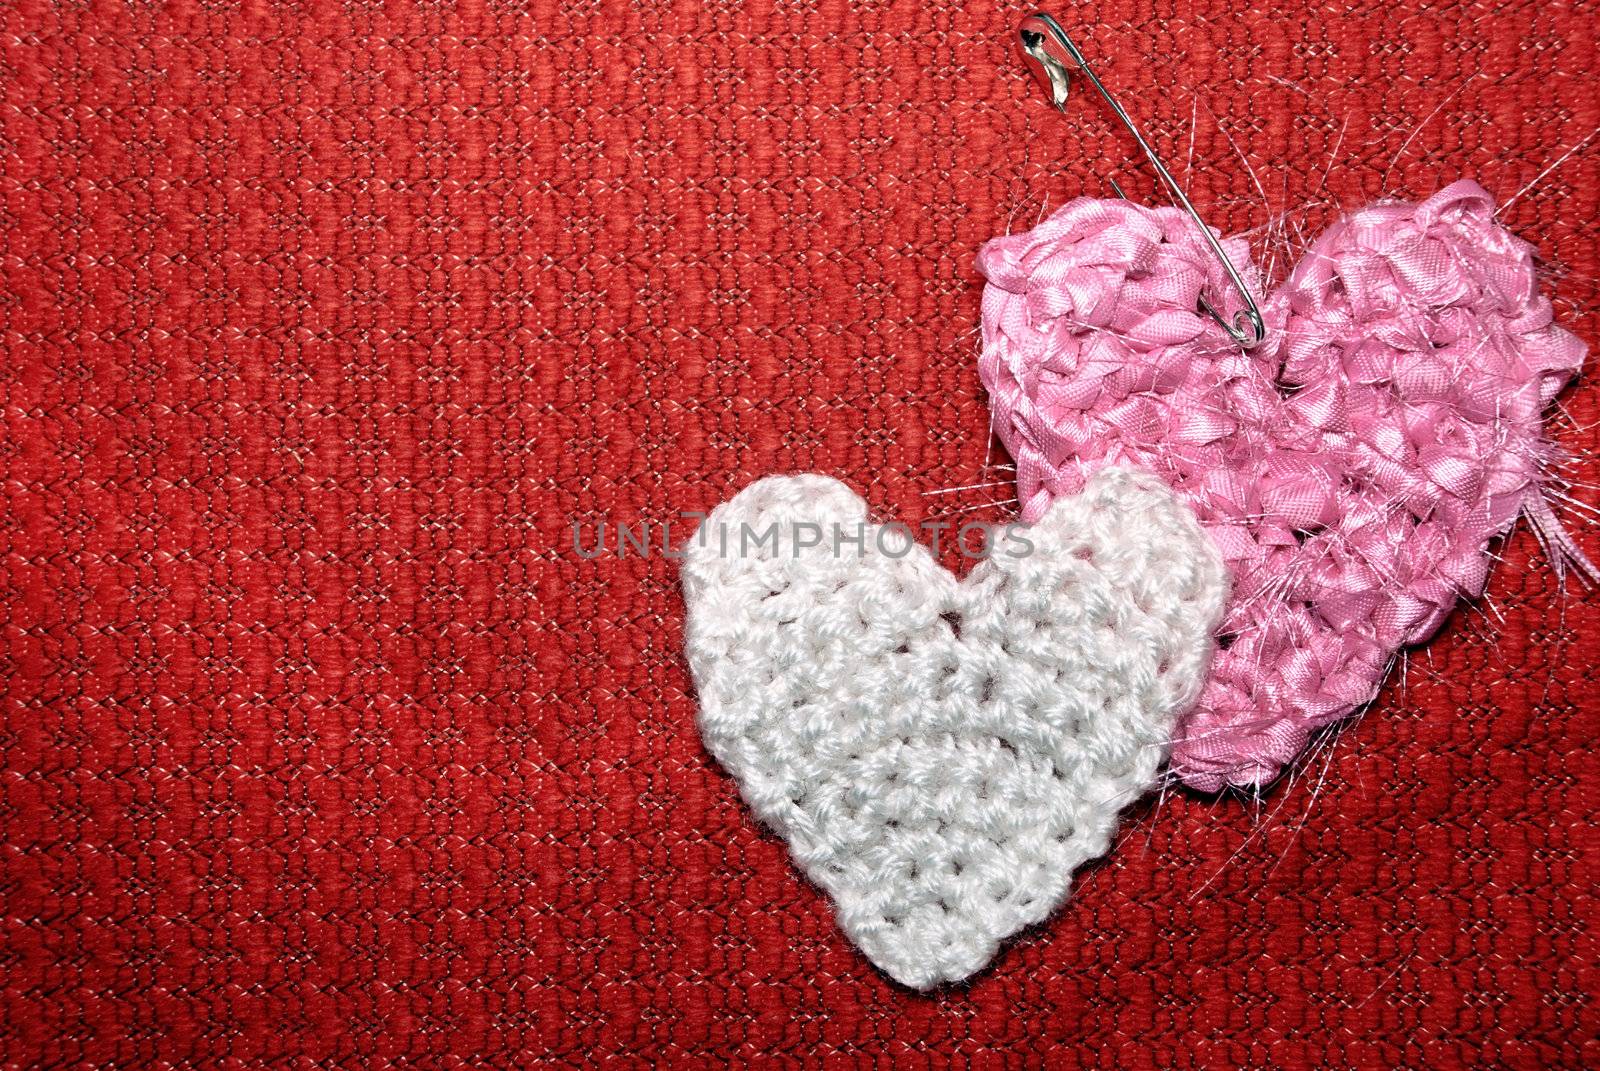 Two heart knitted by negativ